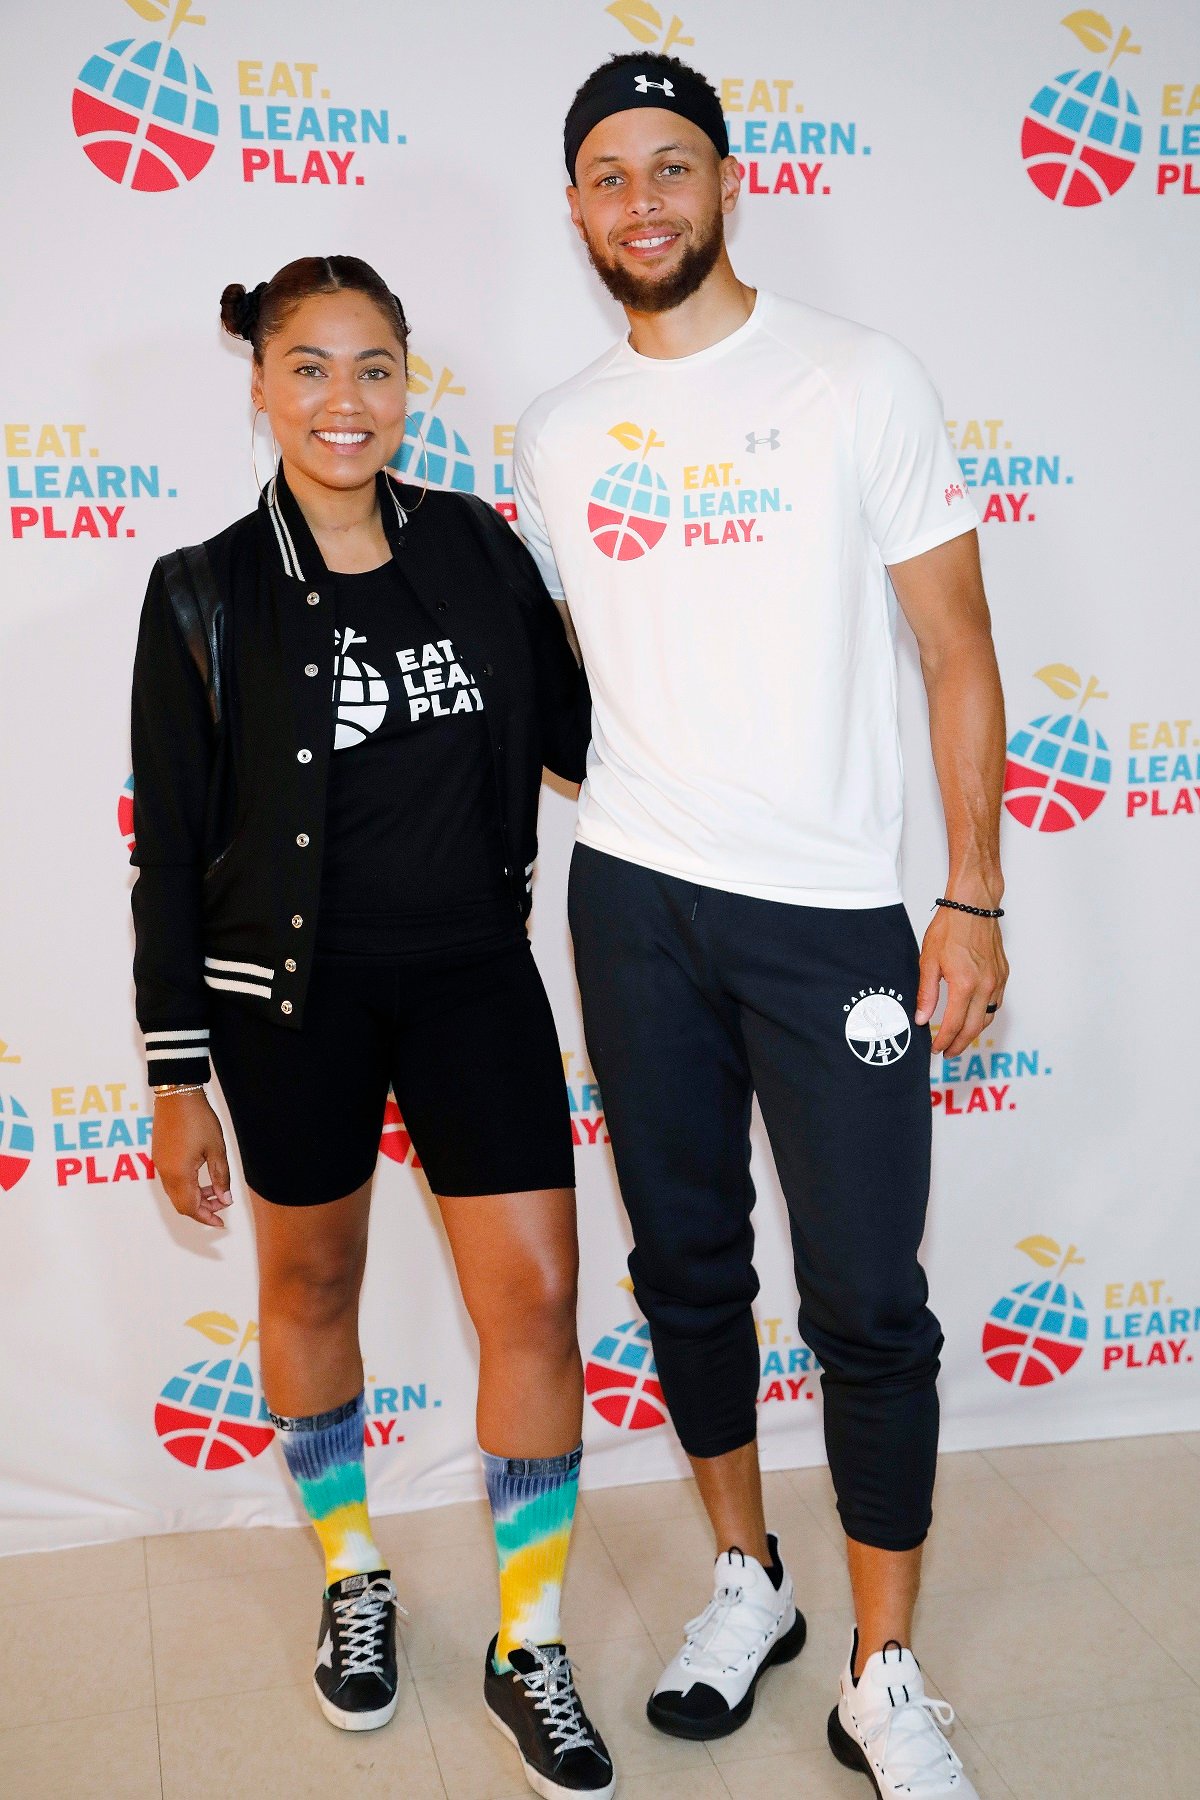 Ayesha Curry and Stephen Curry attend the Eat. Learn. Play. Foundation launch